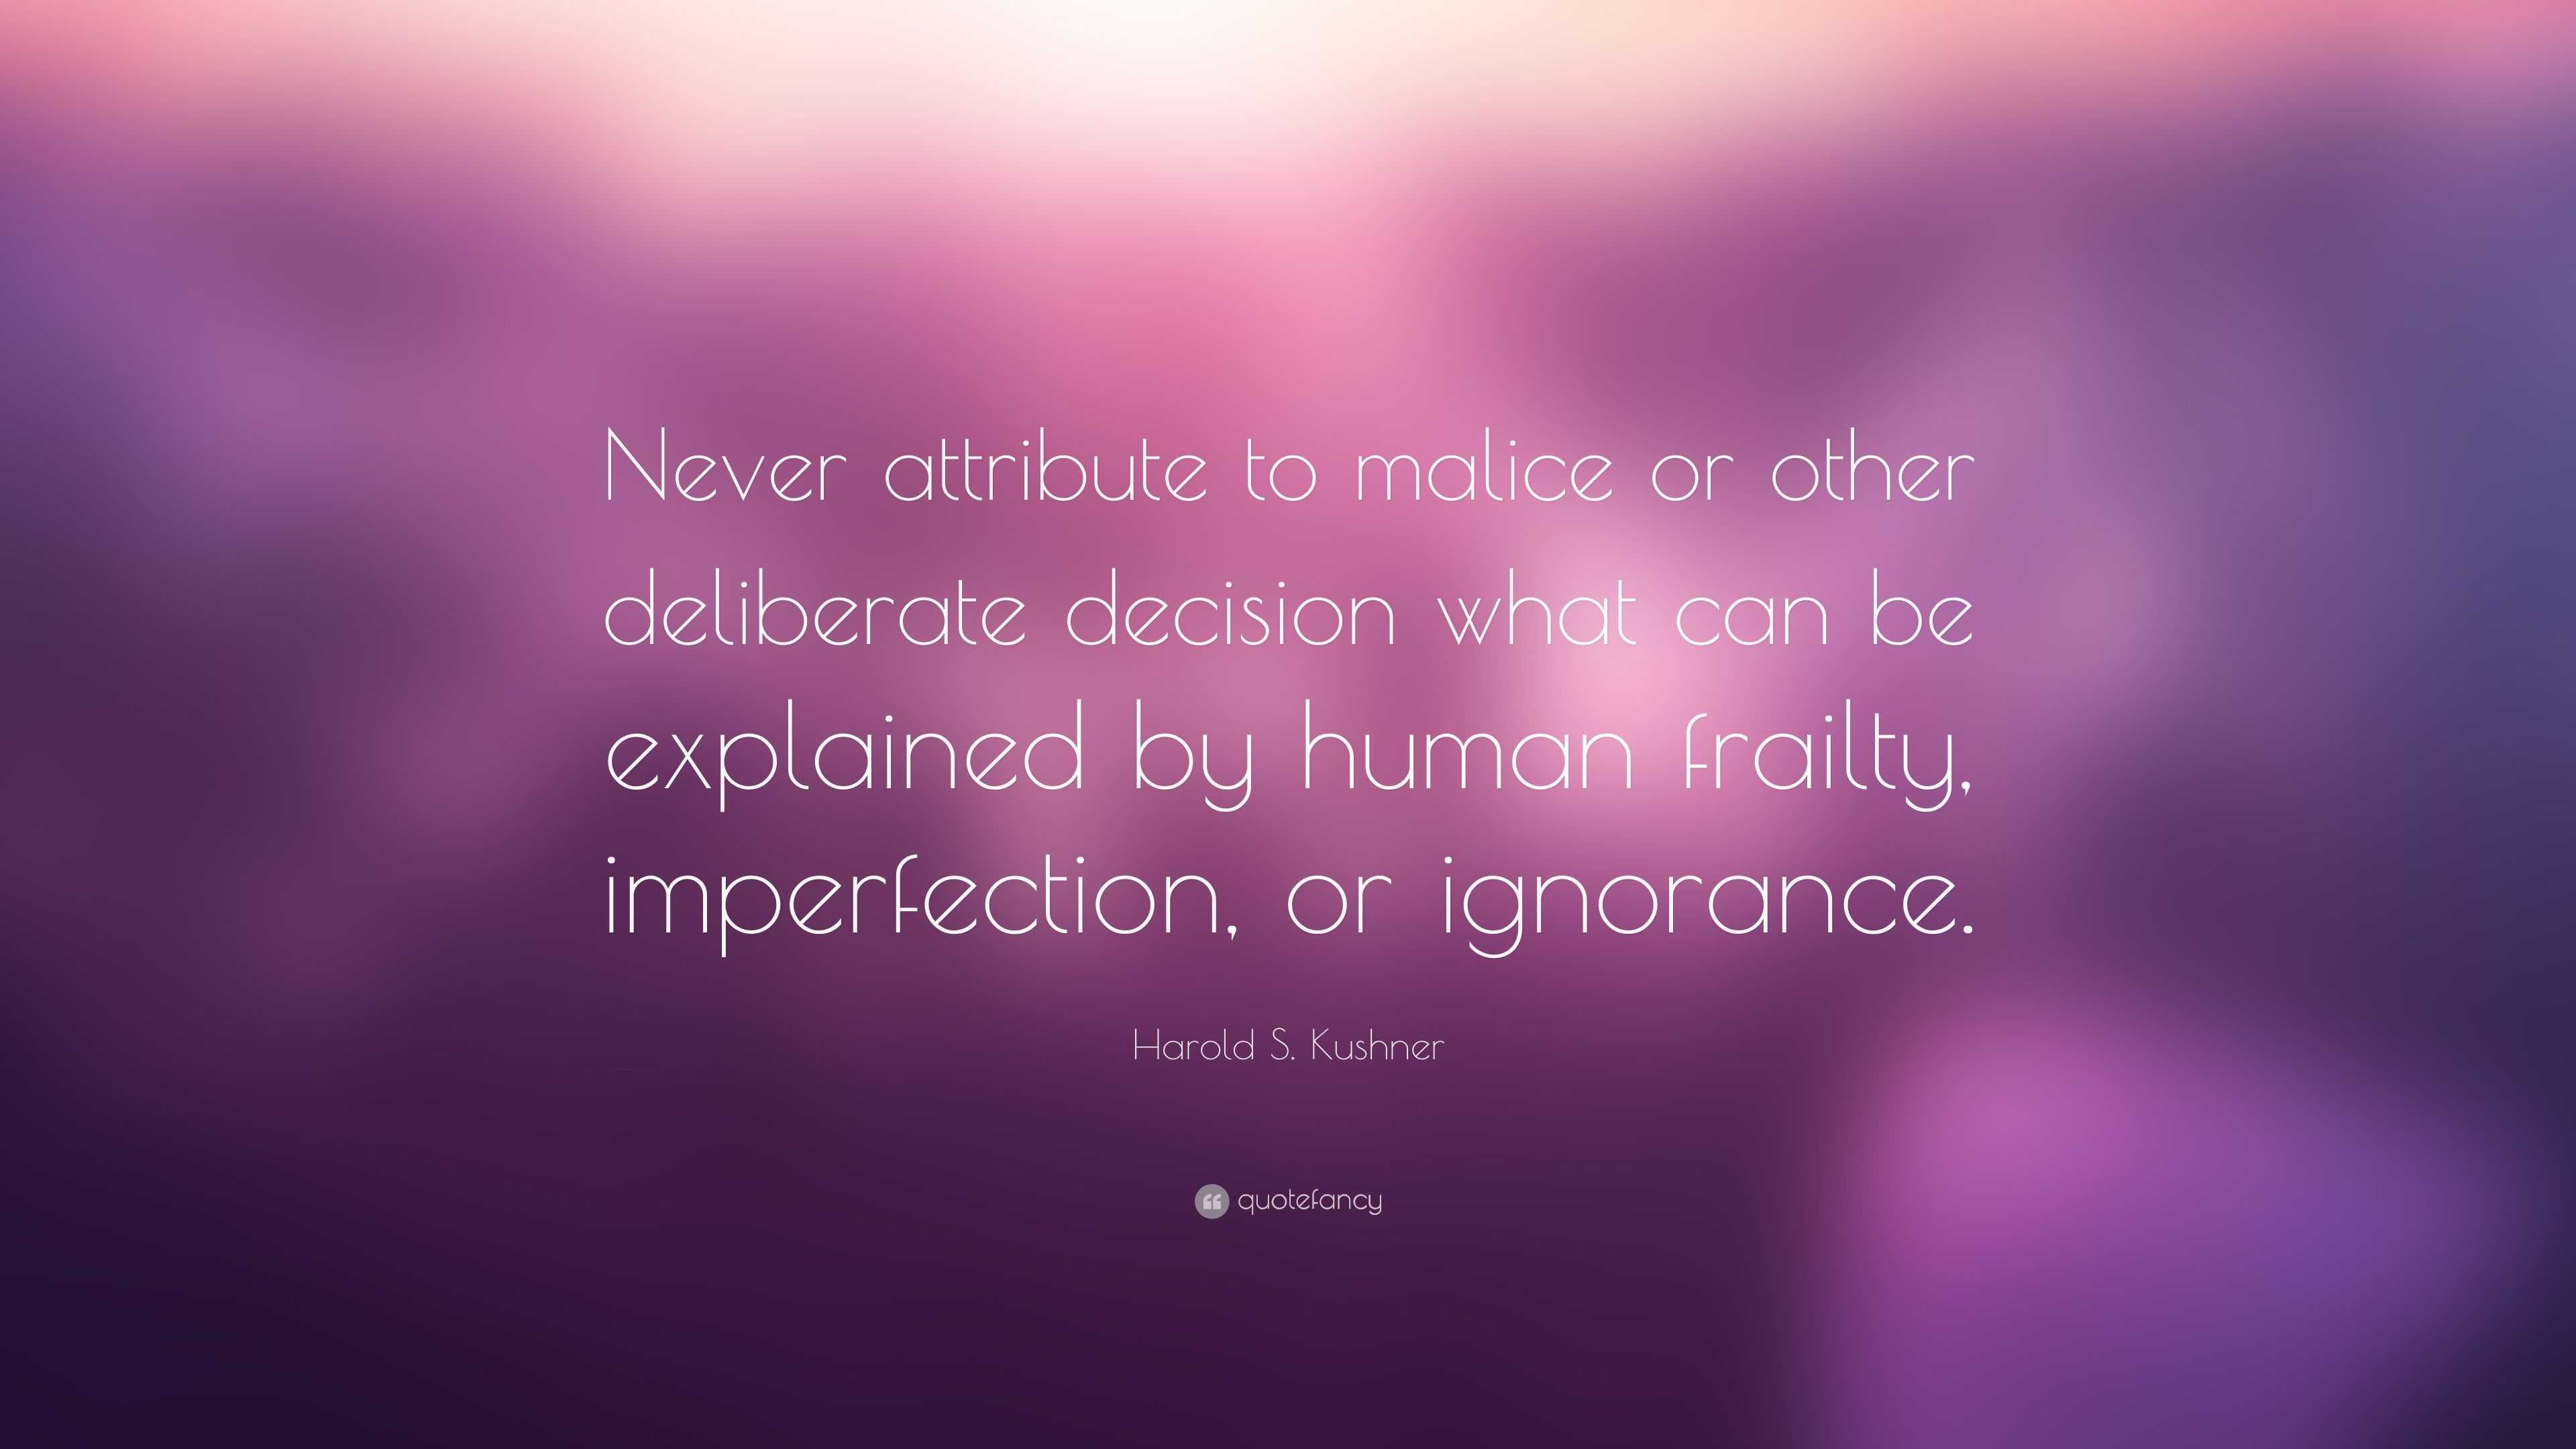 Harold S. Kushner Quote: “Never attribute to malice or other deliberate ...